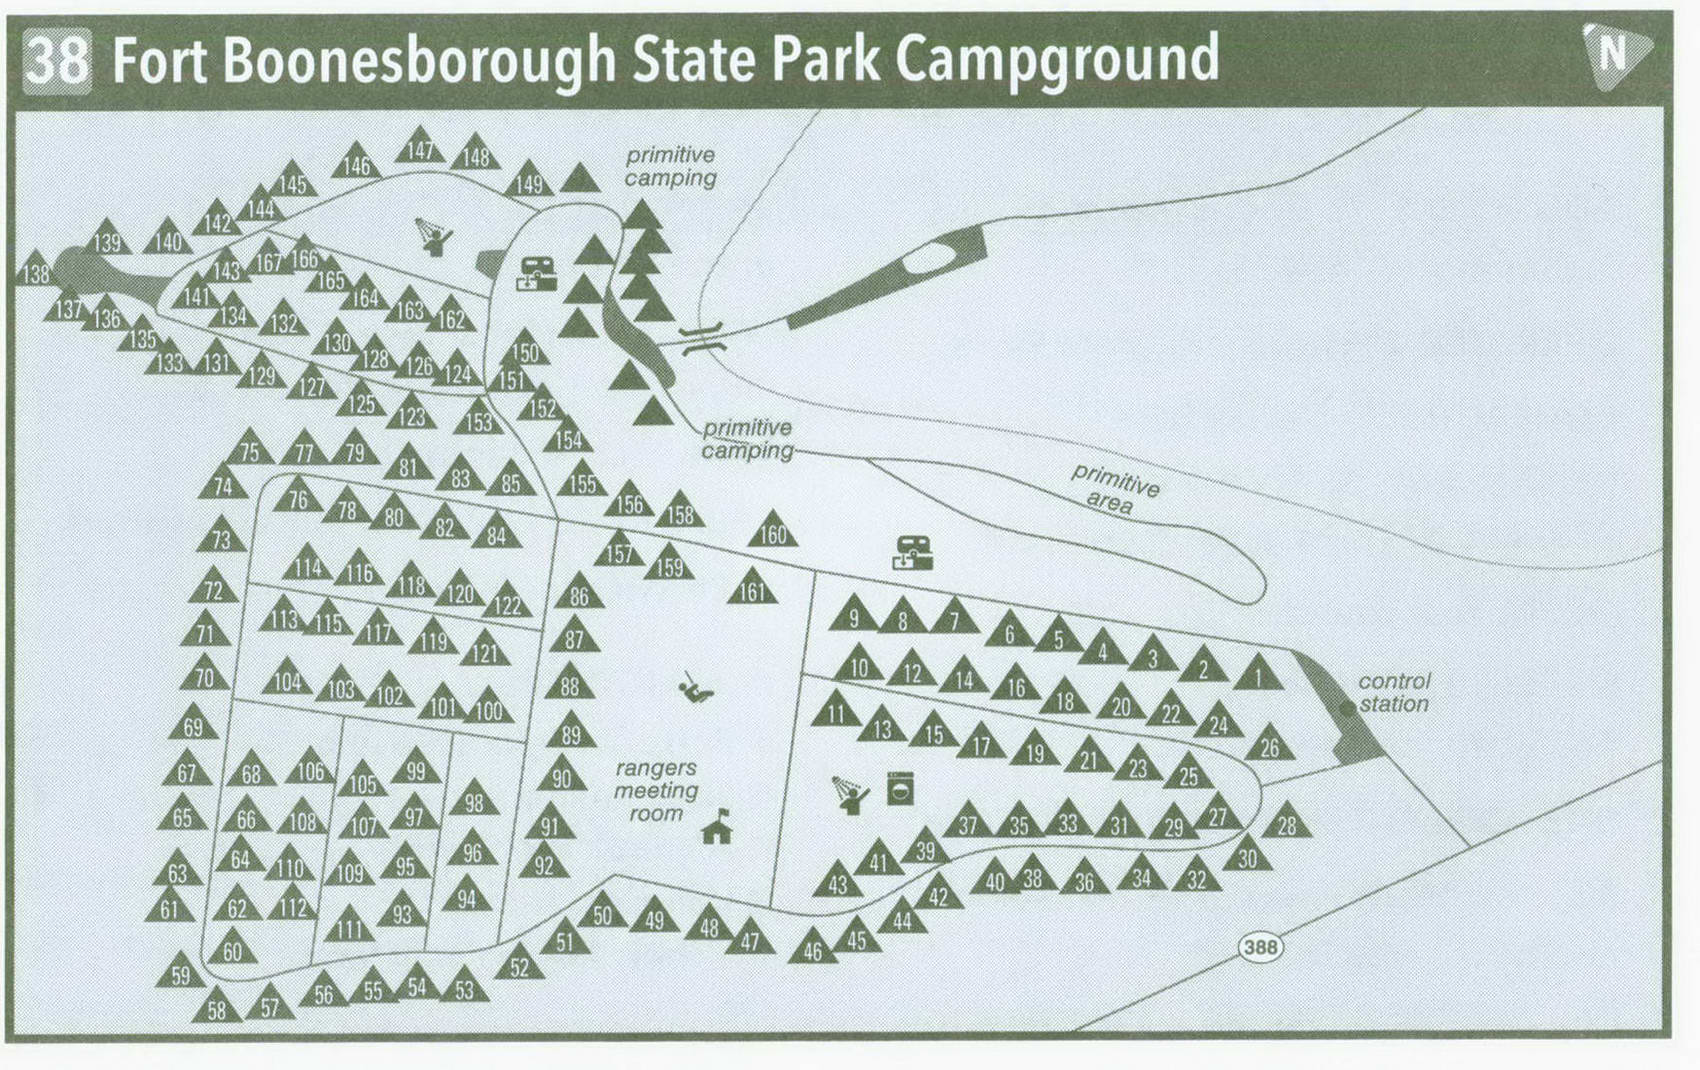 Plan of Fort Boonesborough State Park Campground